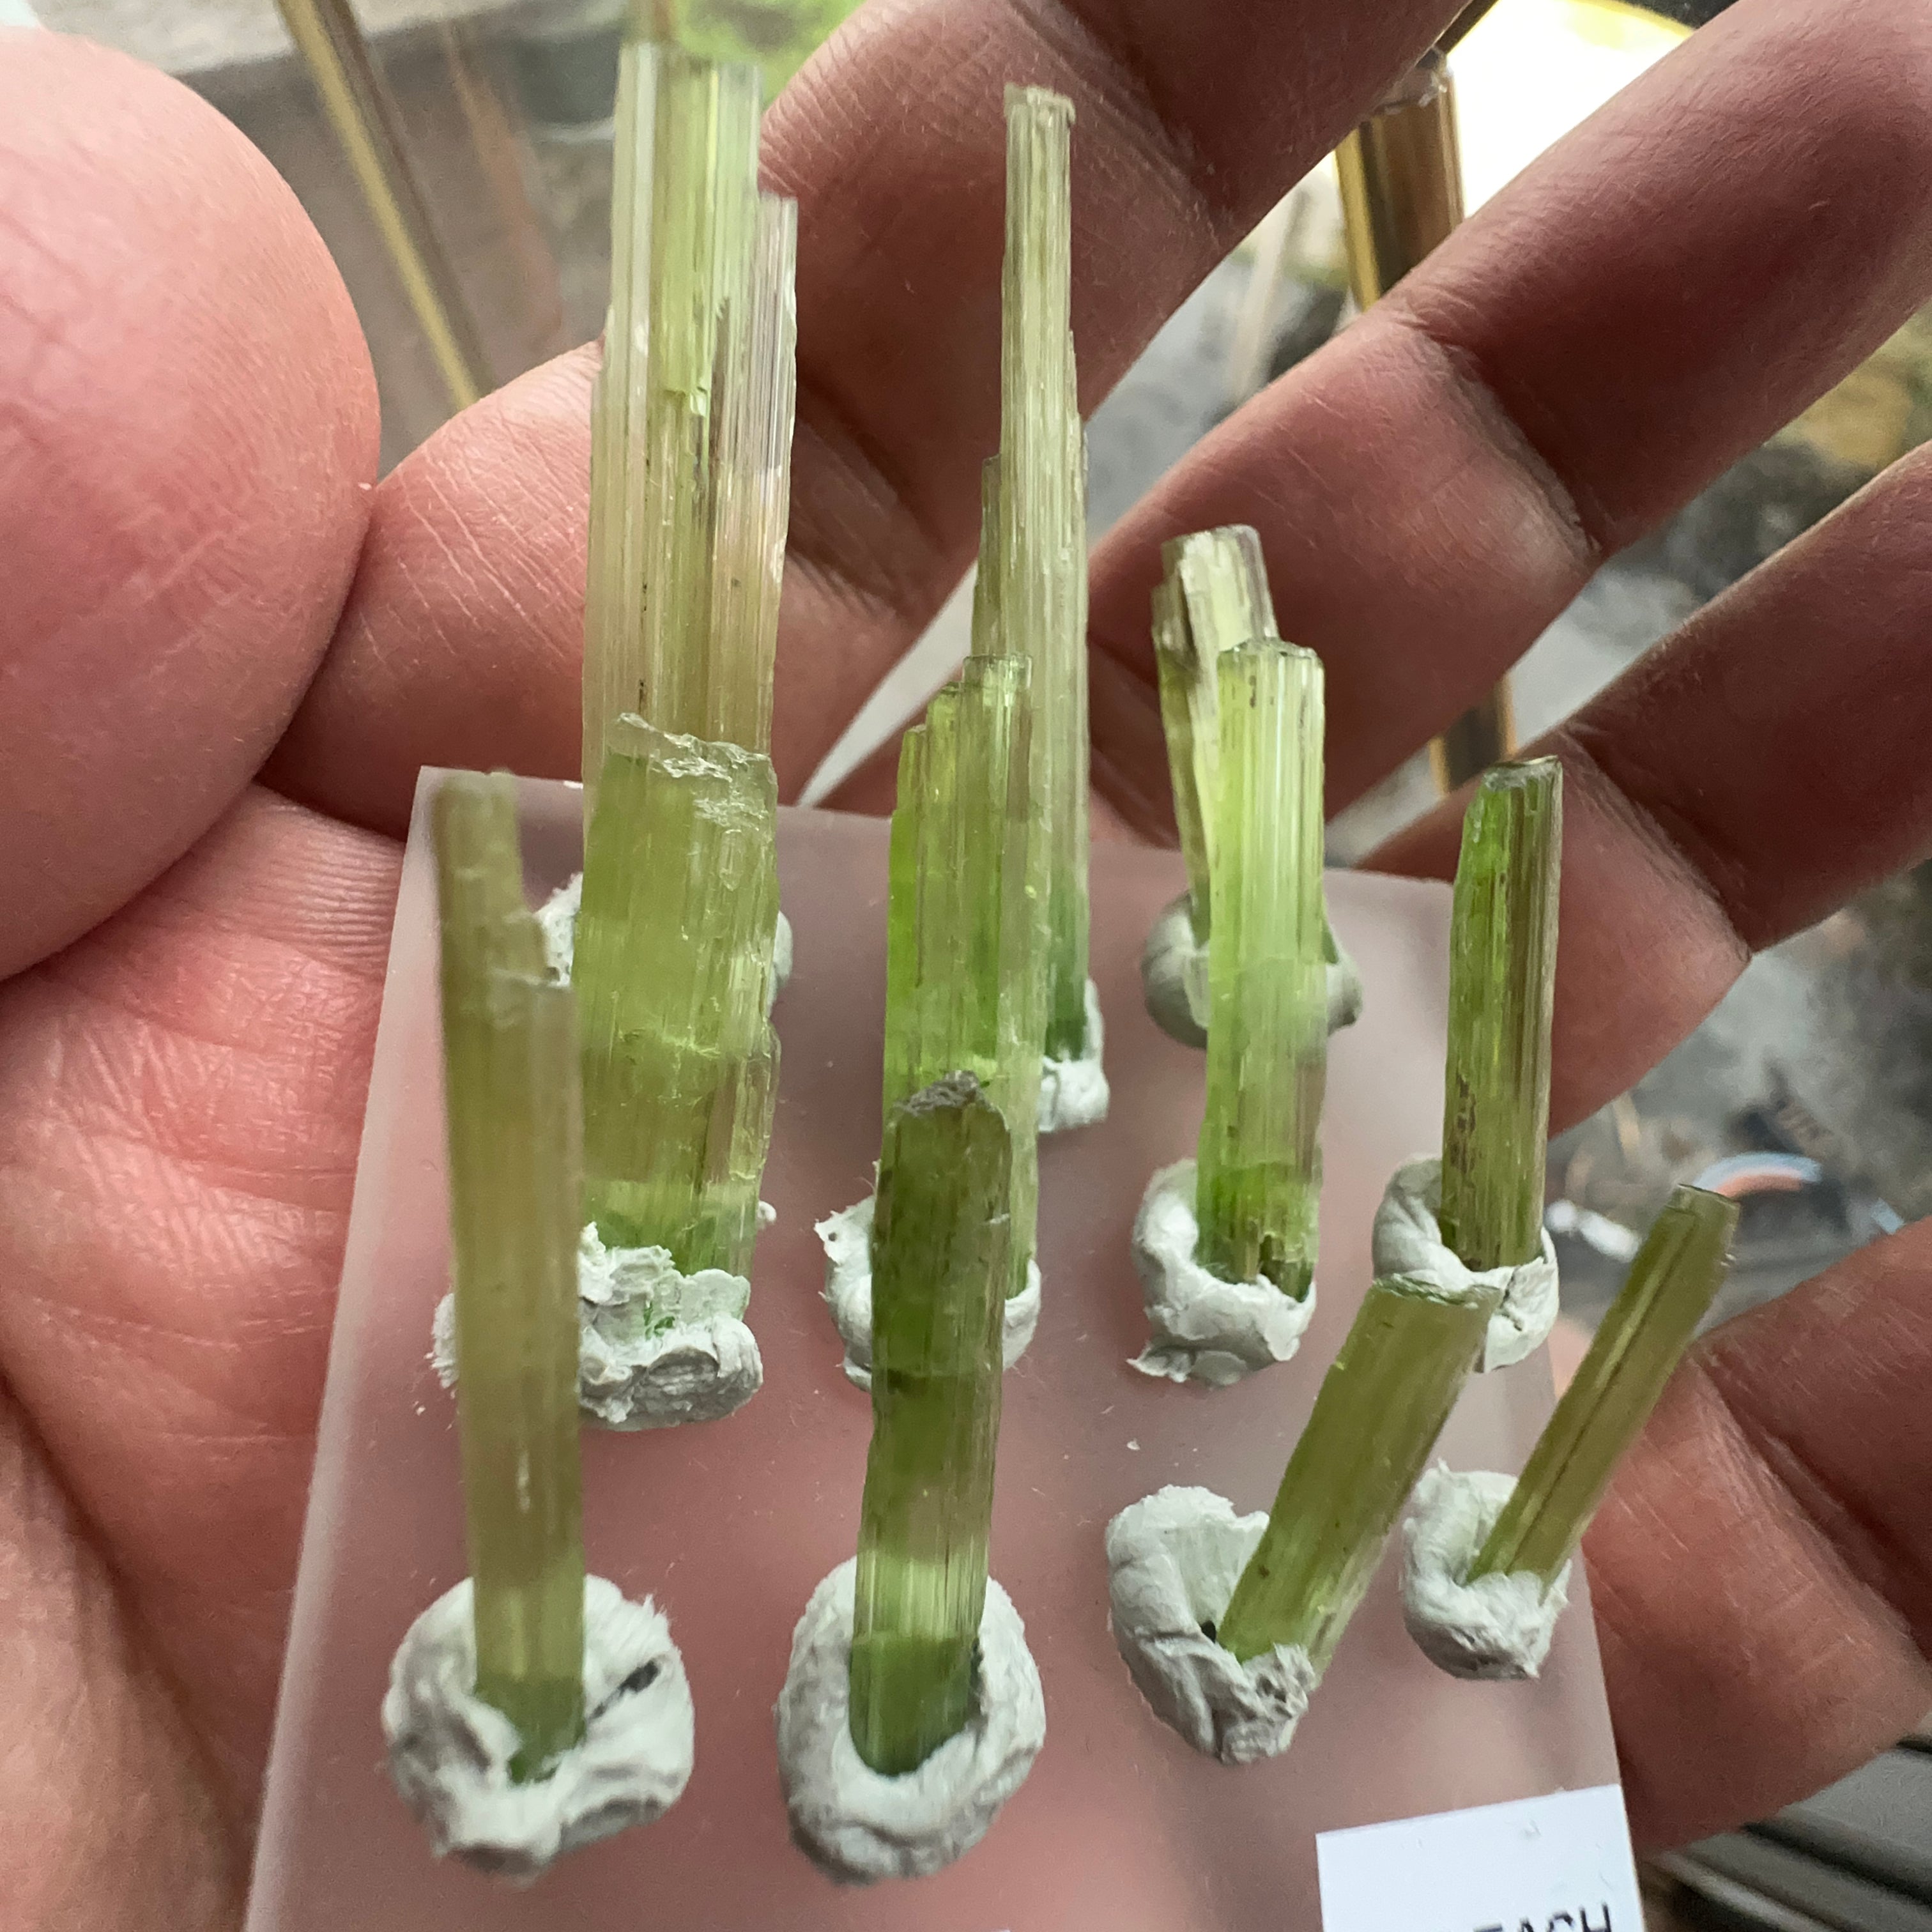 15pc Tremolite Crystal Lot, Merelani, Tanzania, Untreated Unheated, price for the lot